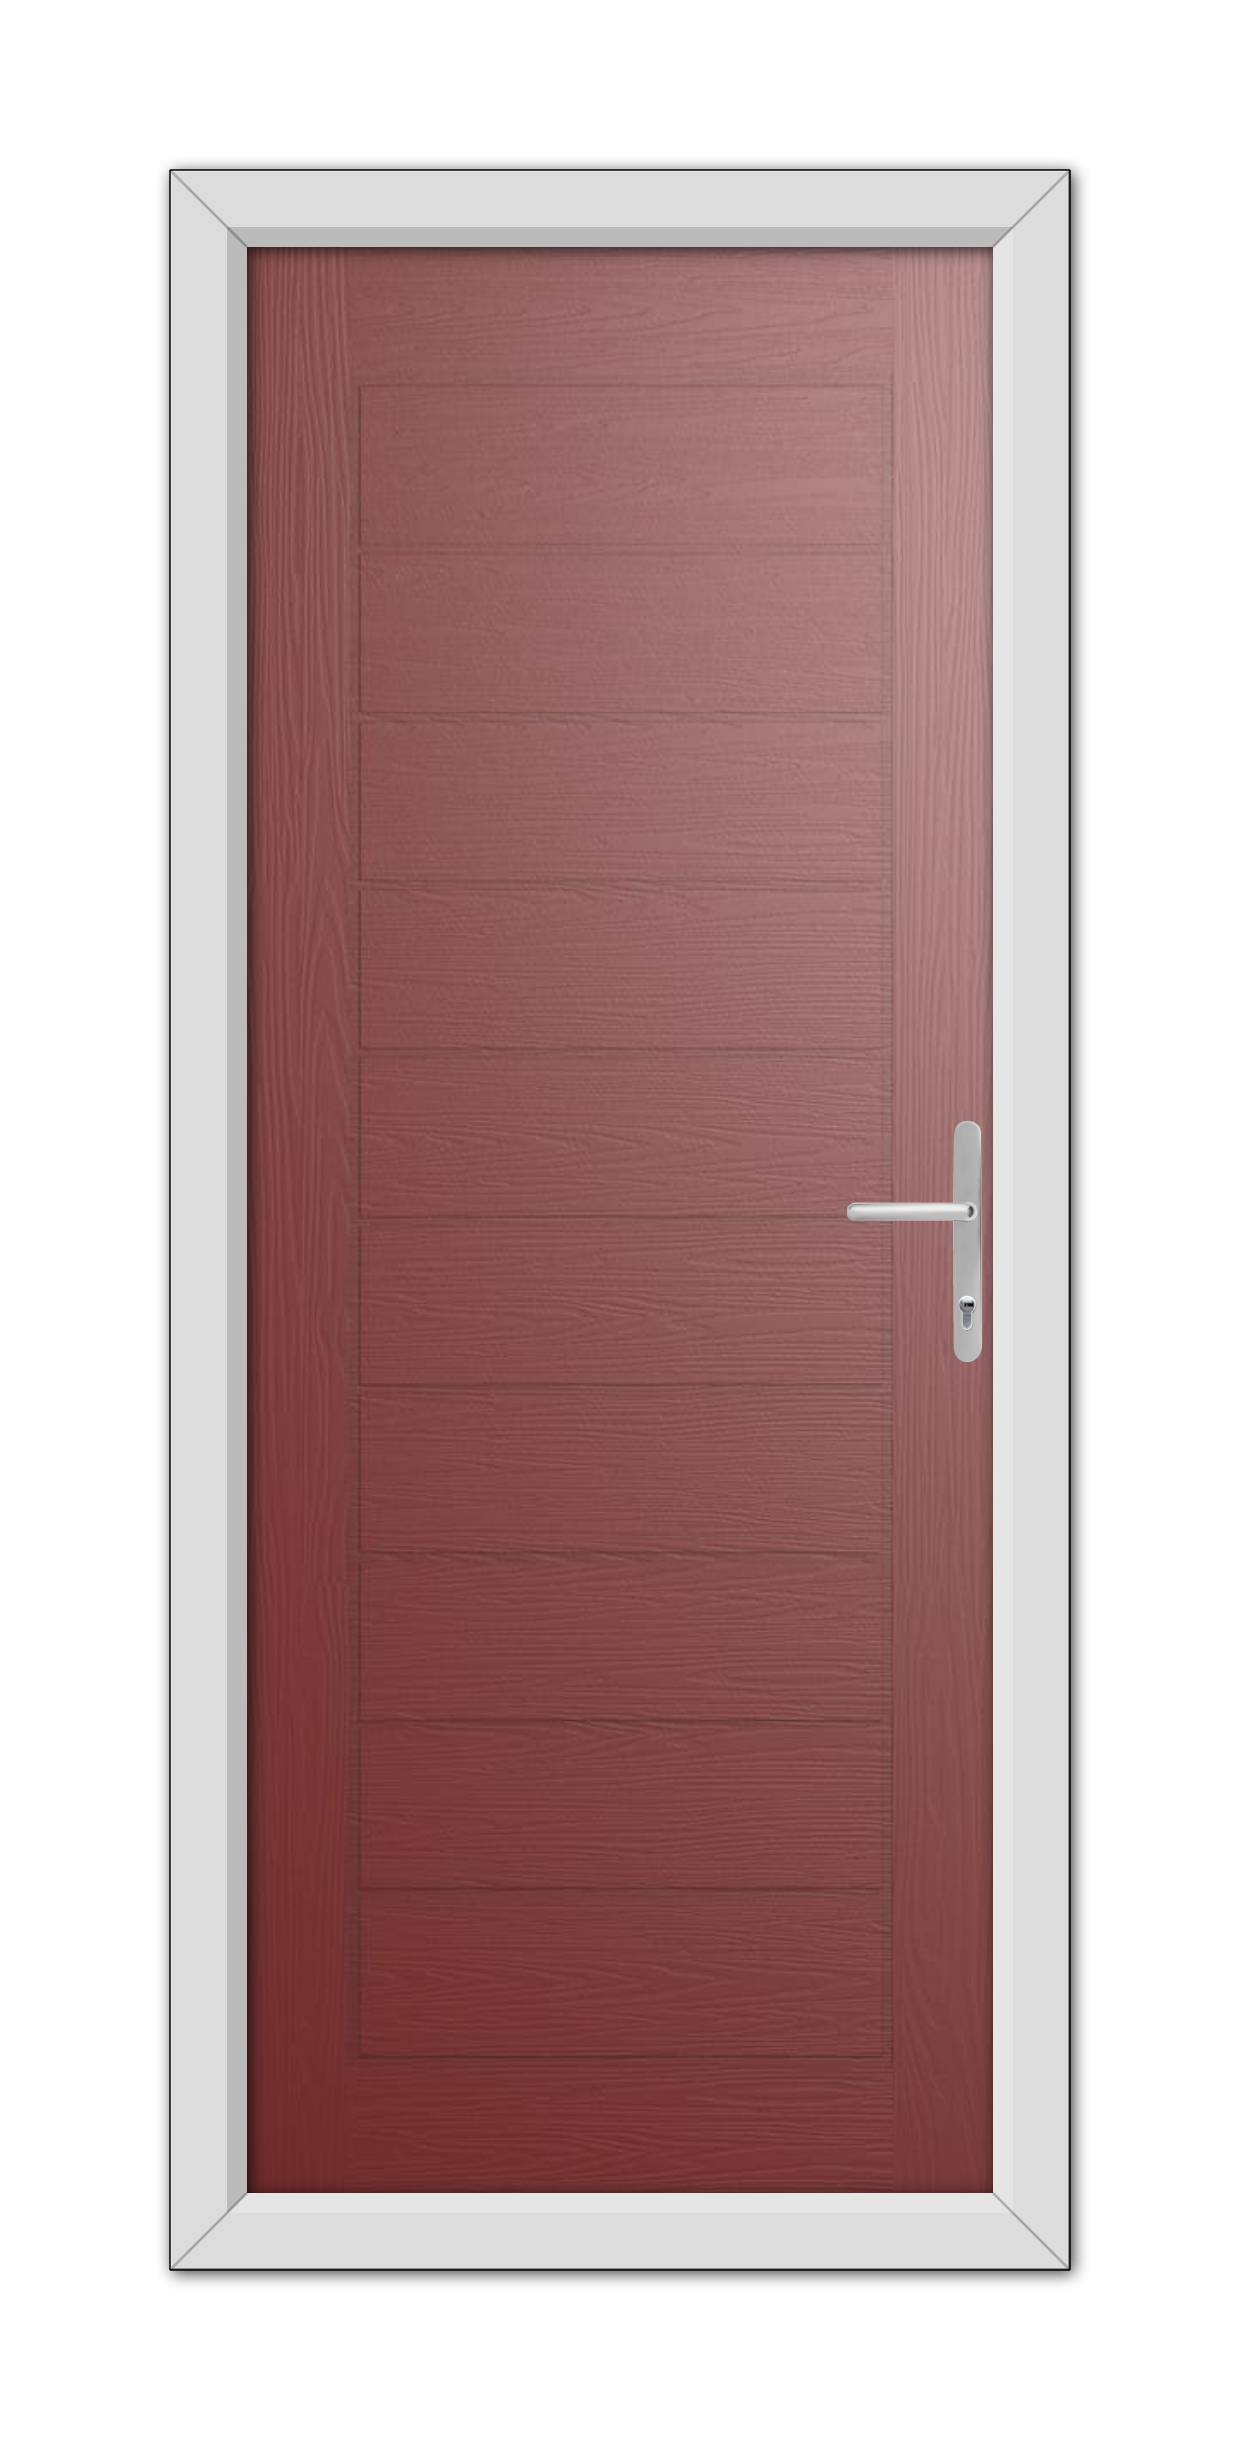 Closed Red Cambridge Composite Door 48mm Timber Core with a silver handle, framed by a white door frame, isolated on a white background.